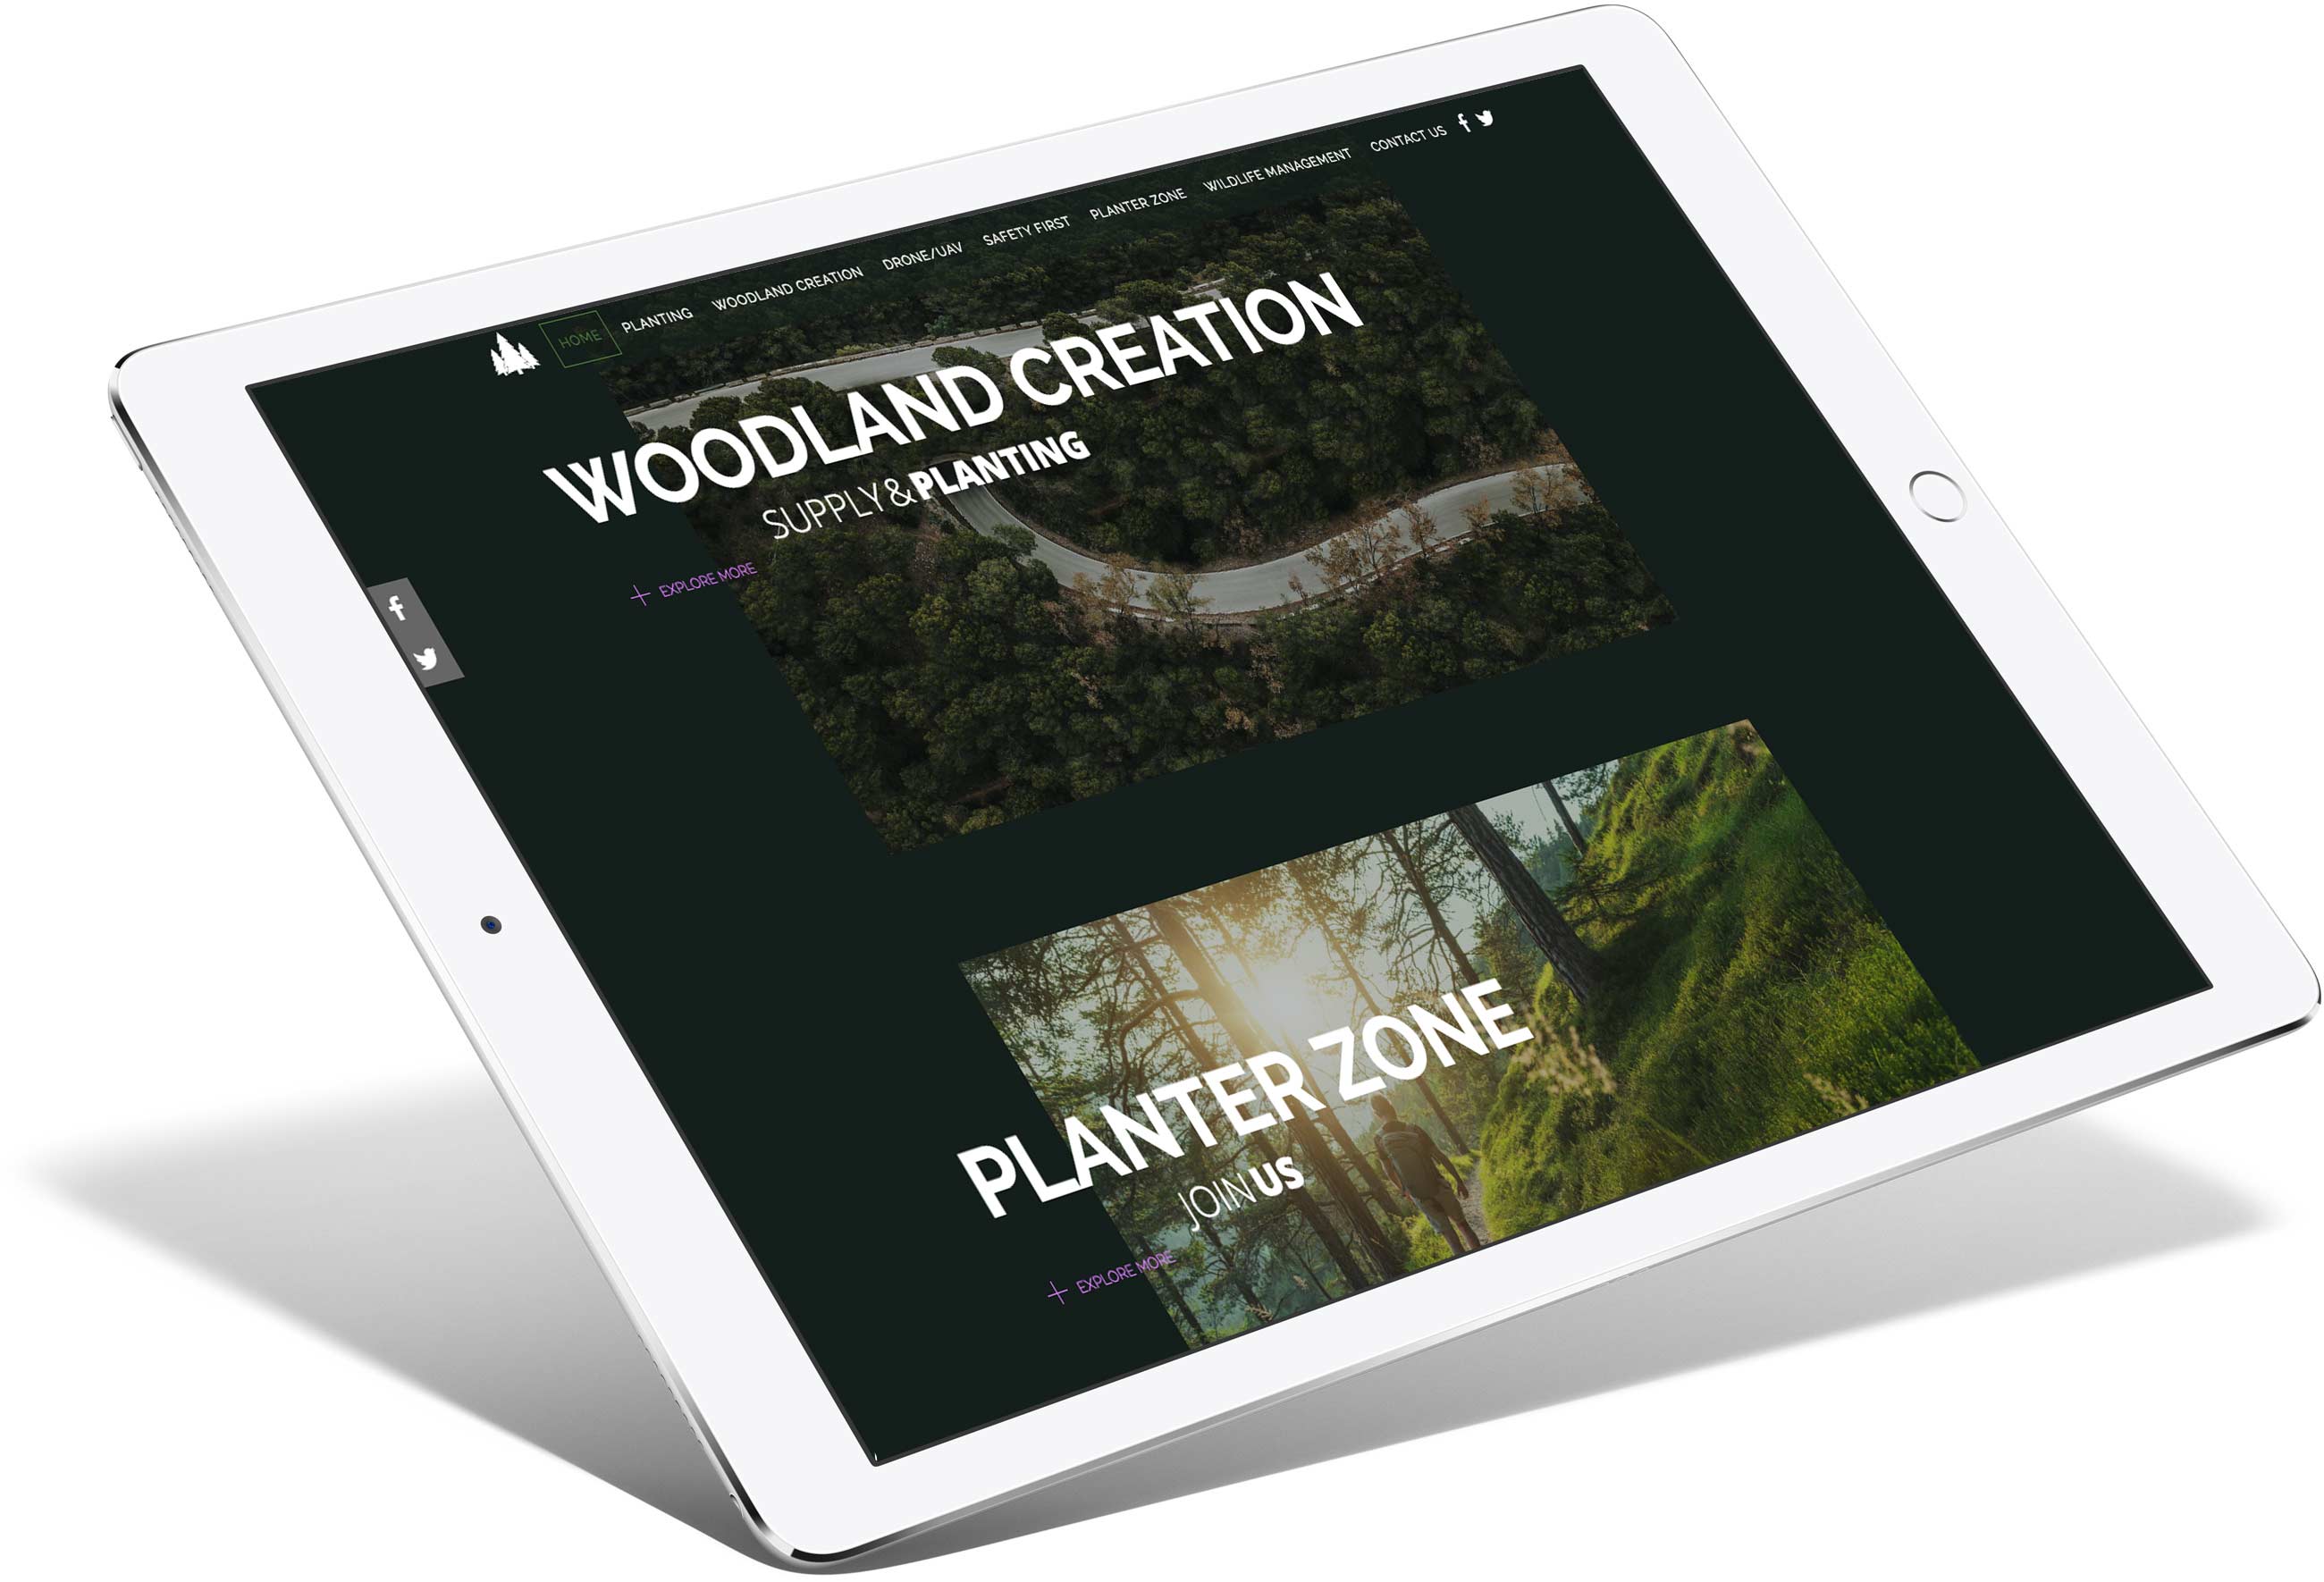 Tomorrow’s Forests | Responsive Website